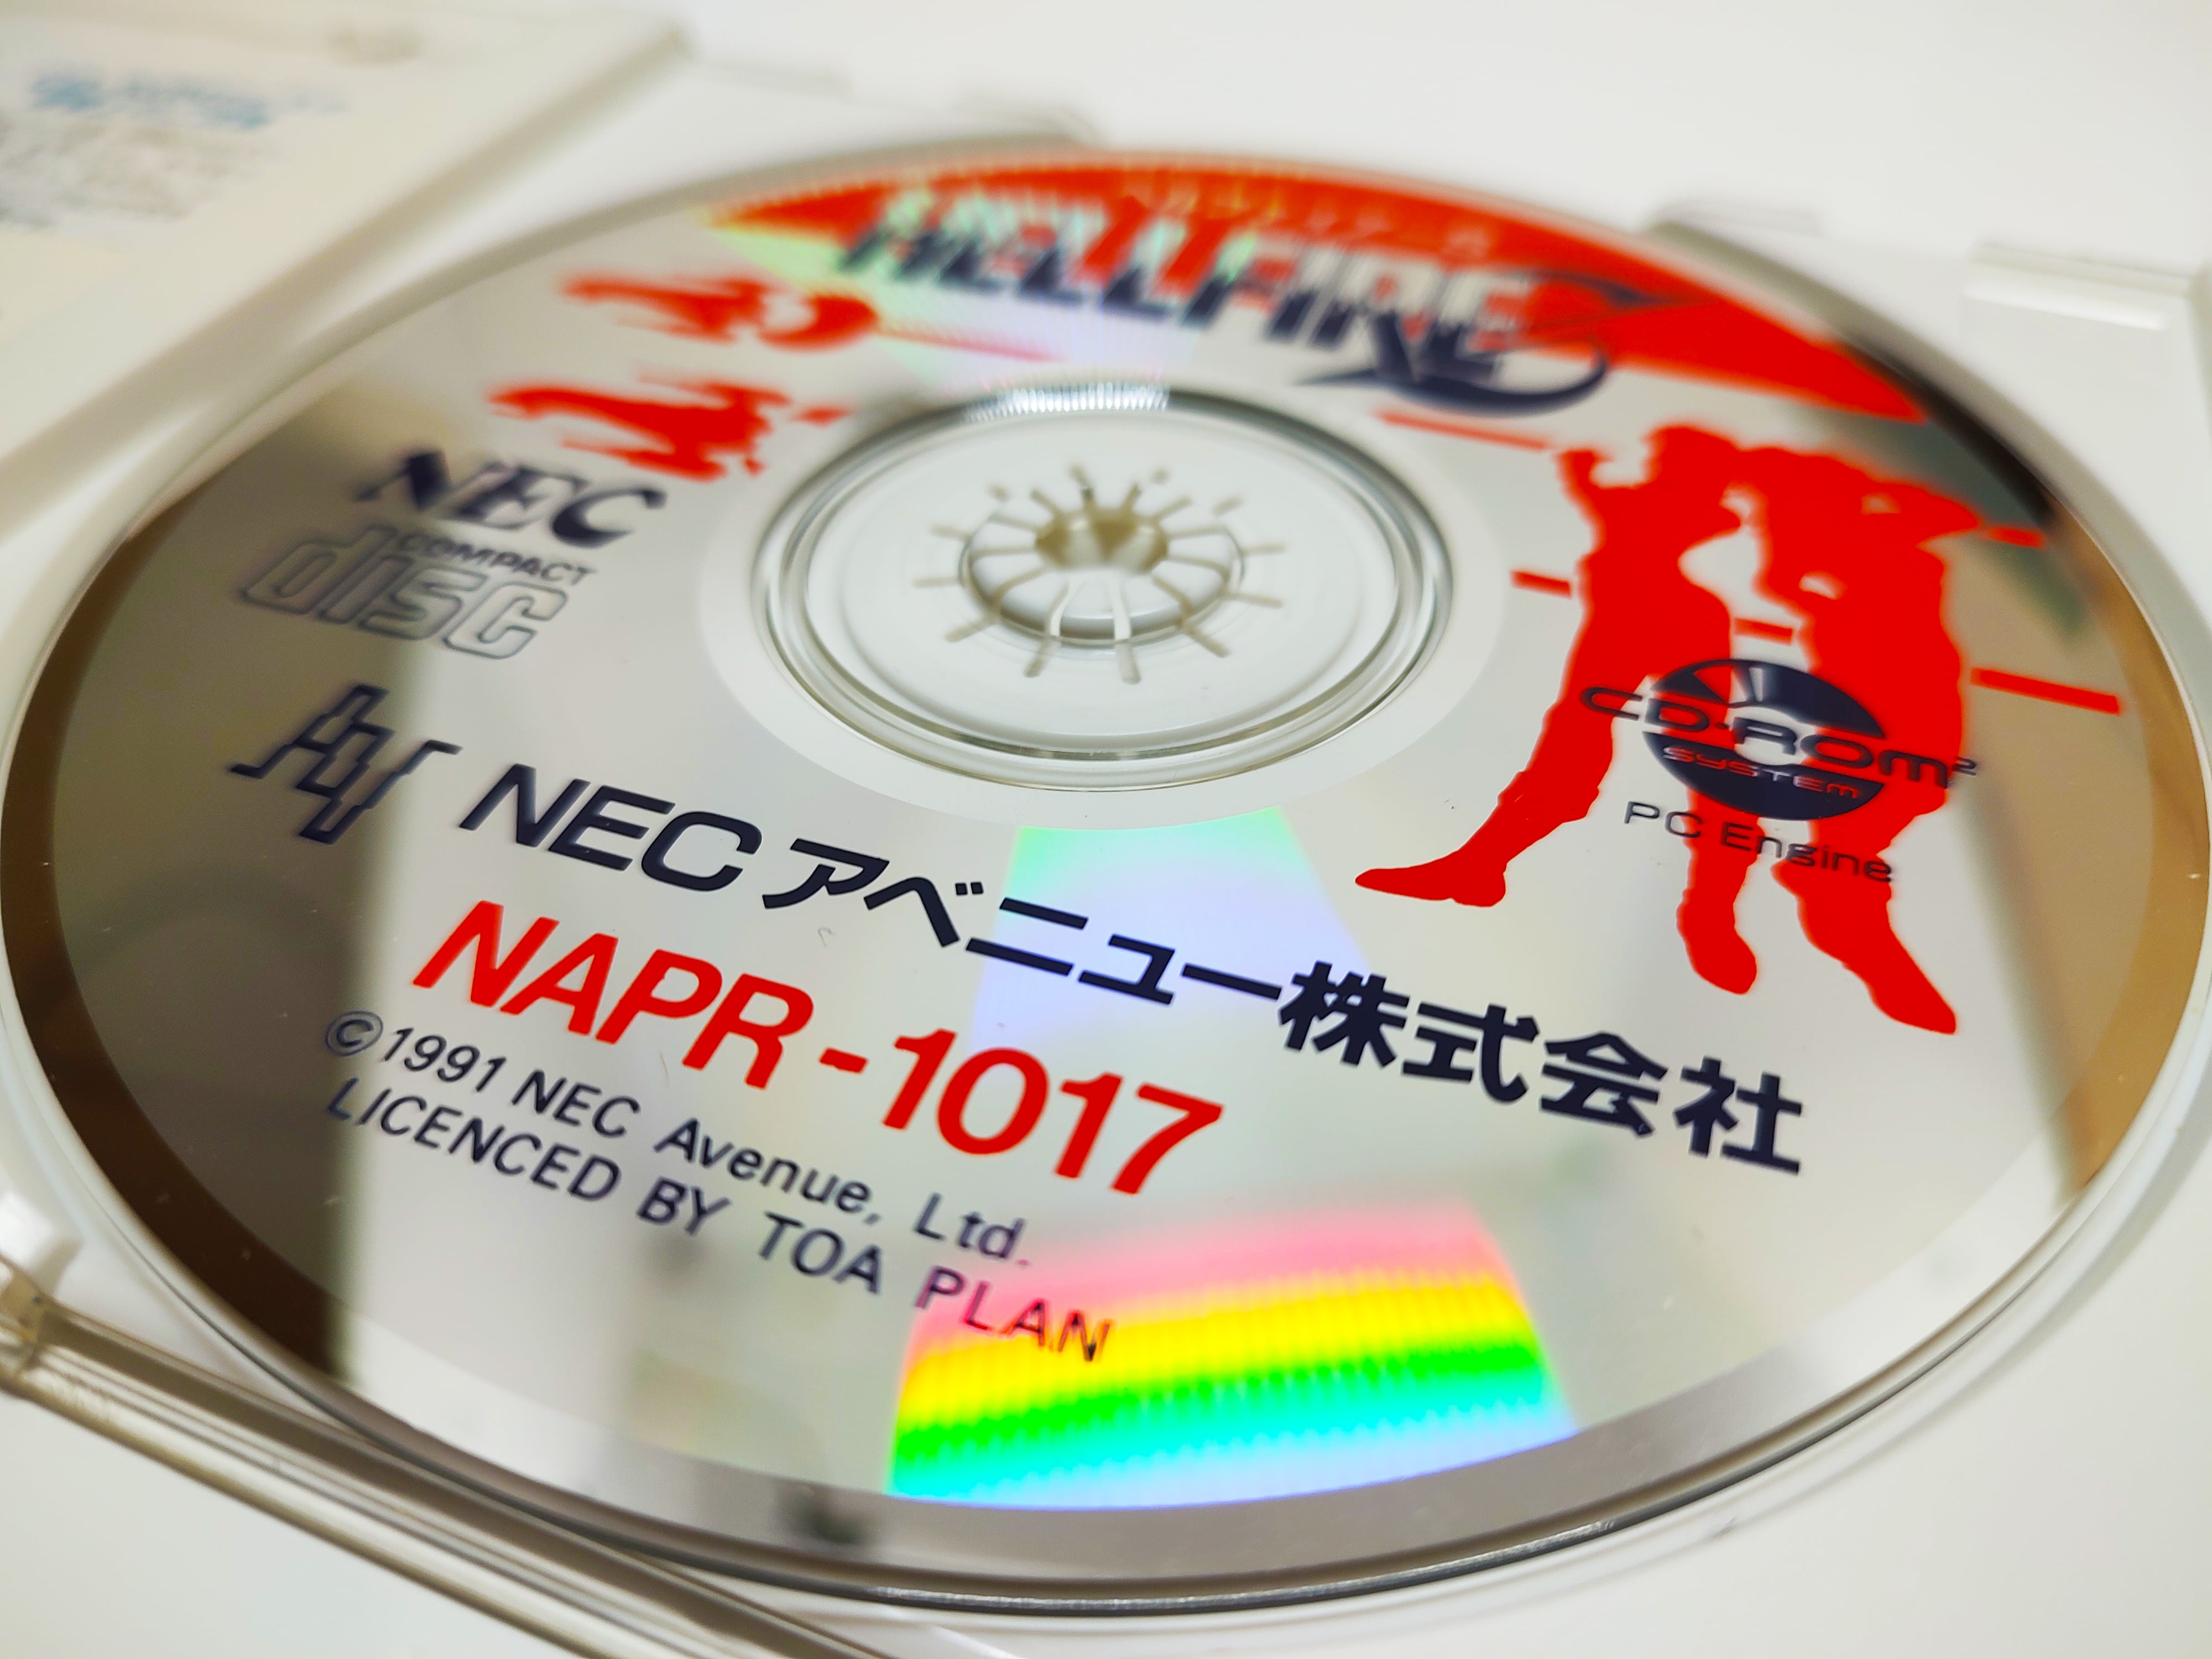 Hellfire S: The Another Story | PC Engine | Disc